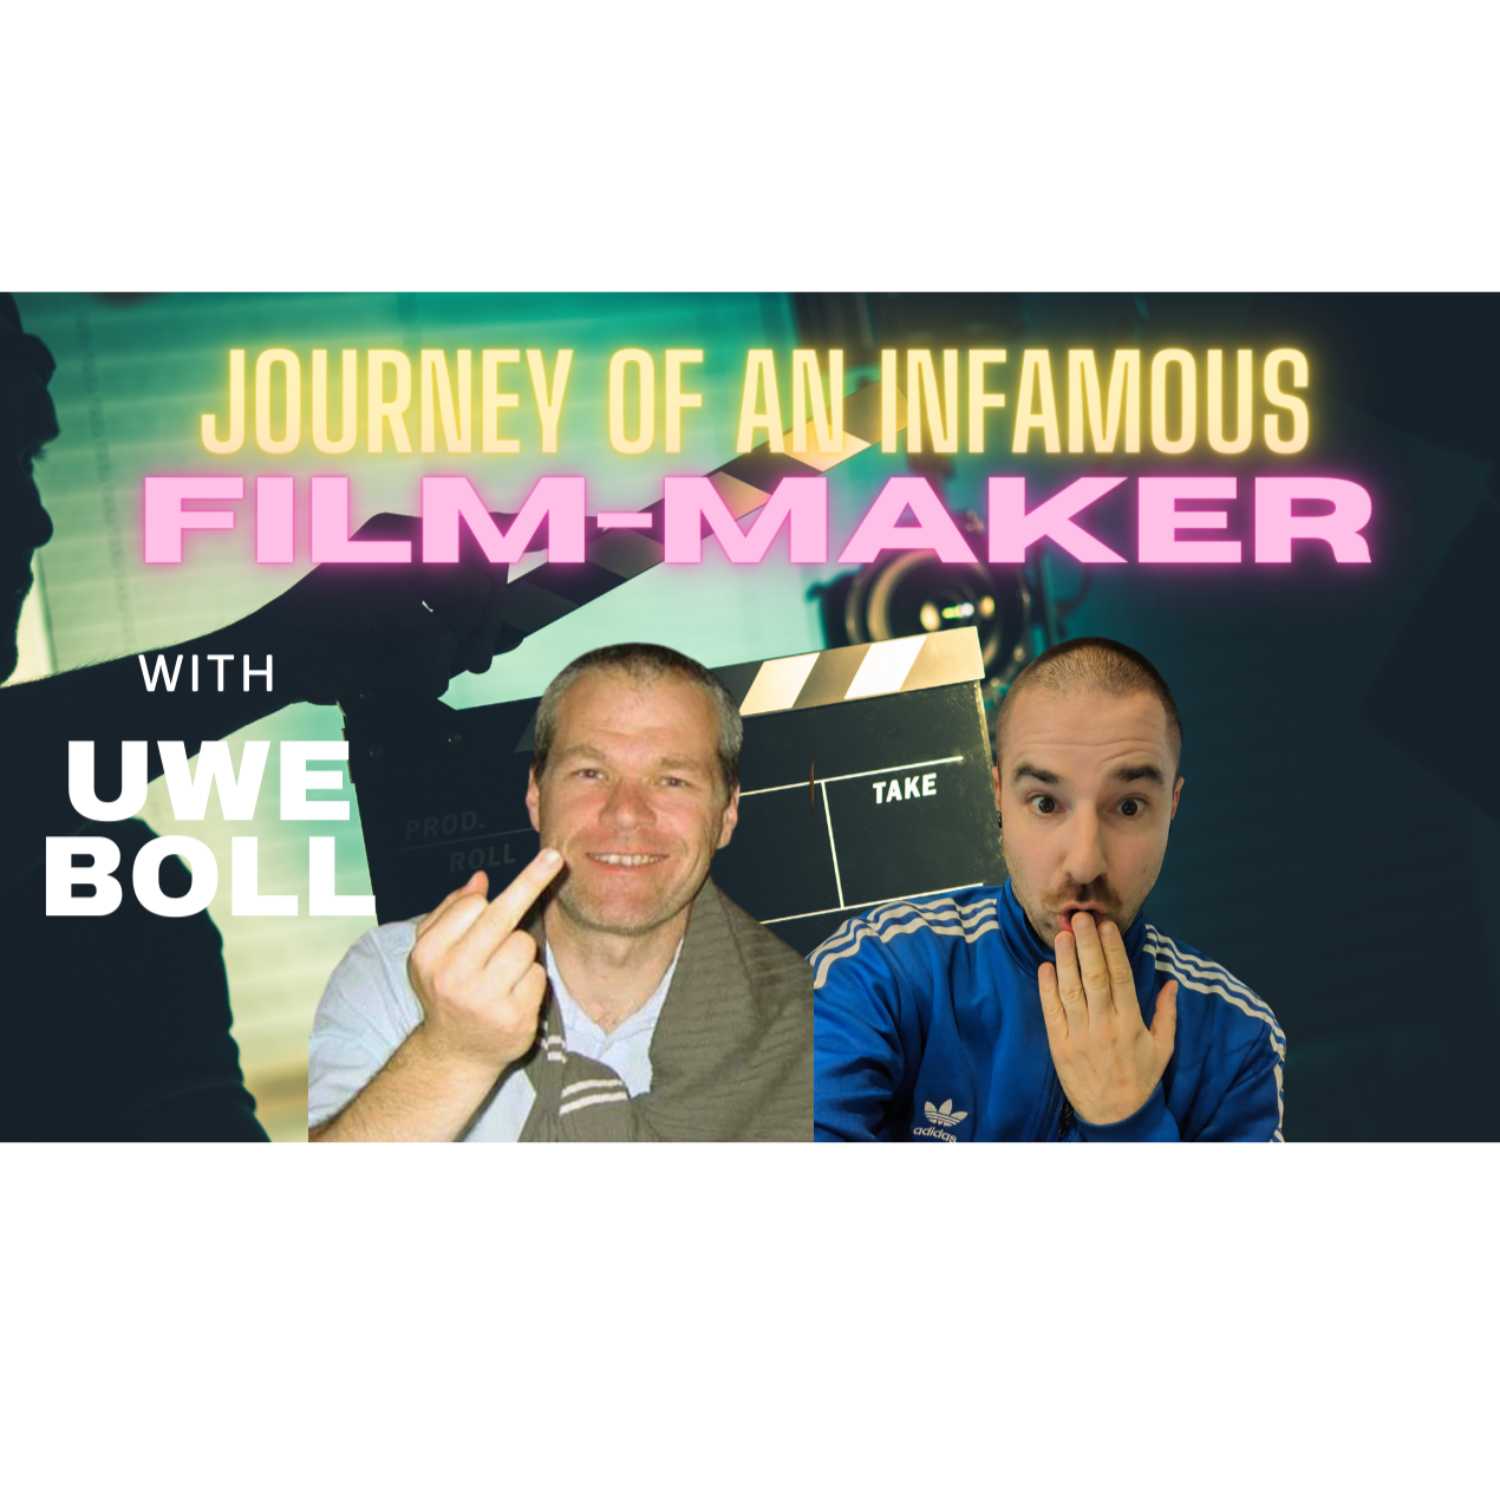 FILMMAKING and HOLLYWOOD with Uwe Boll